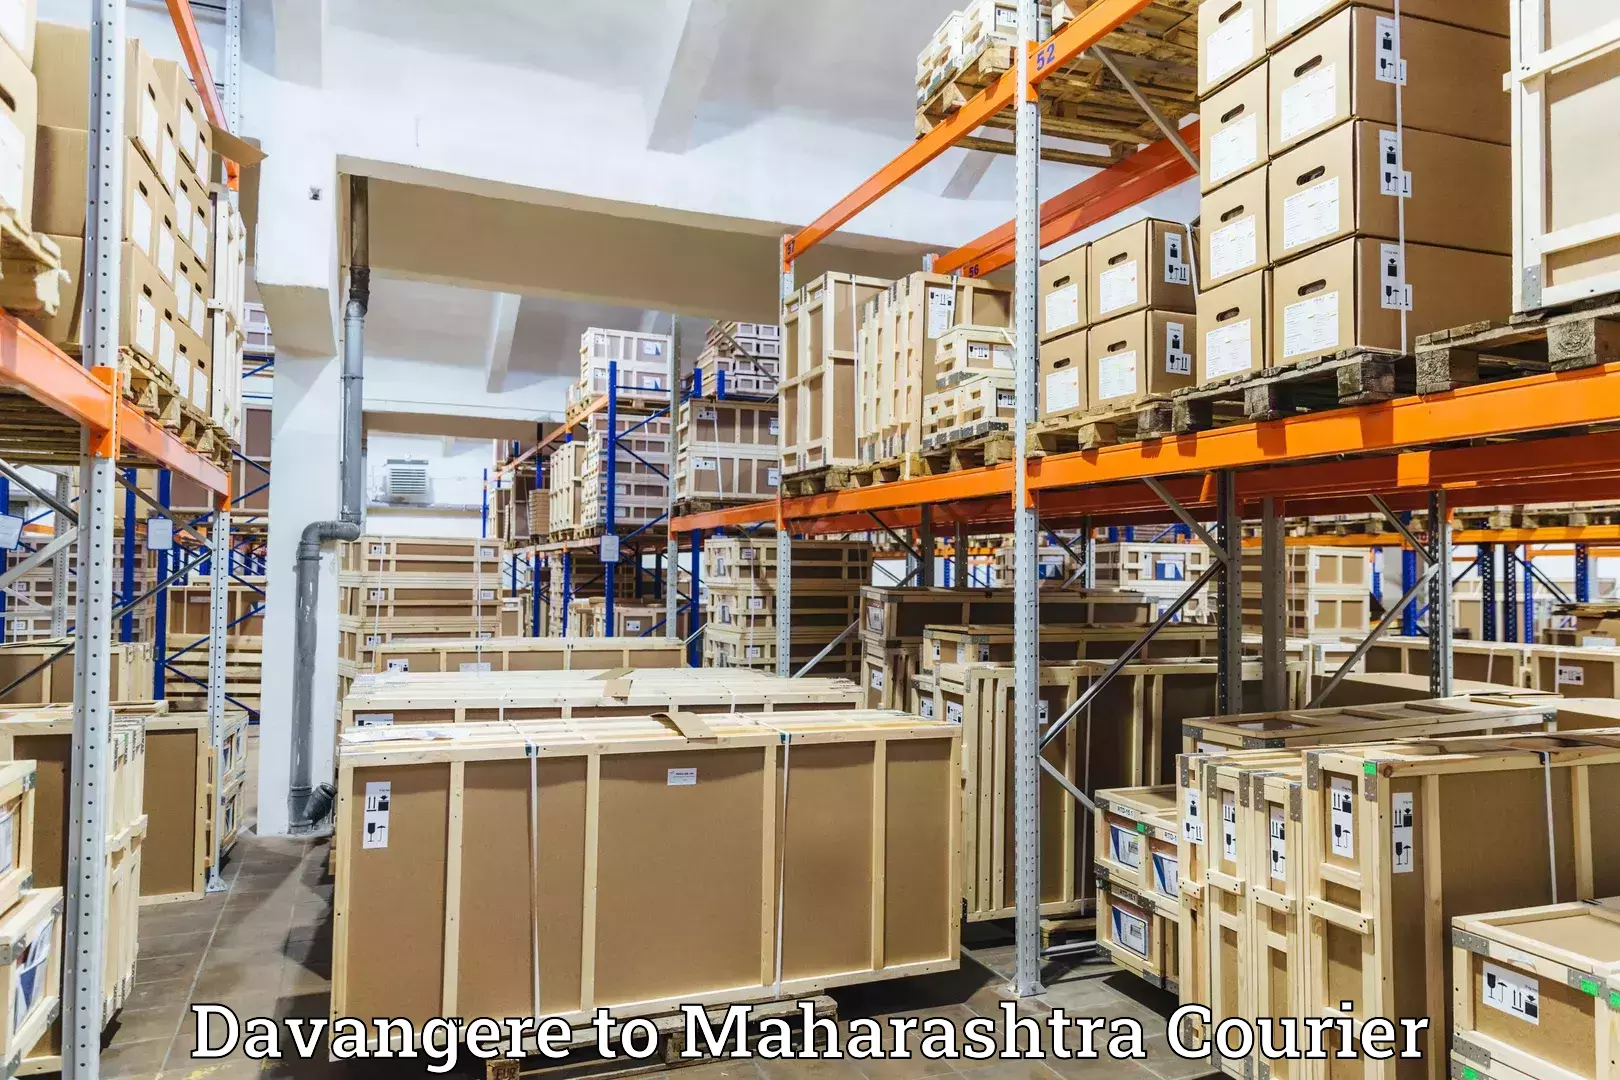 Same-day delivery solutions Davangere to Mahabaleshwar